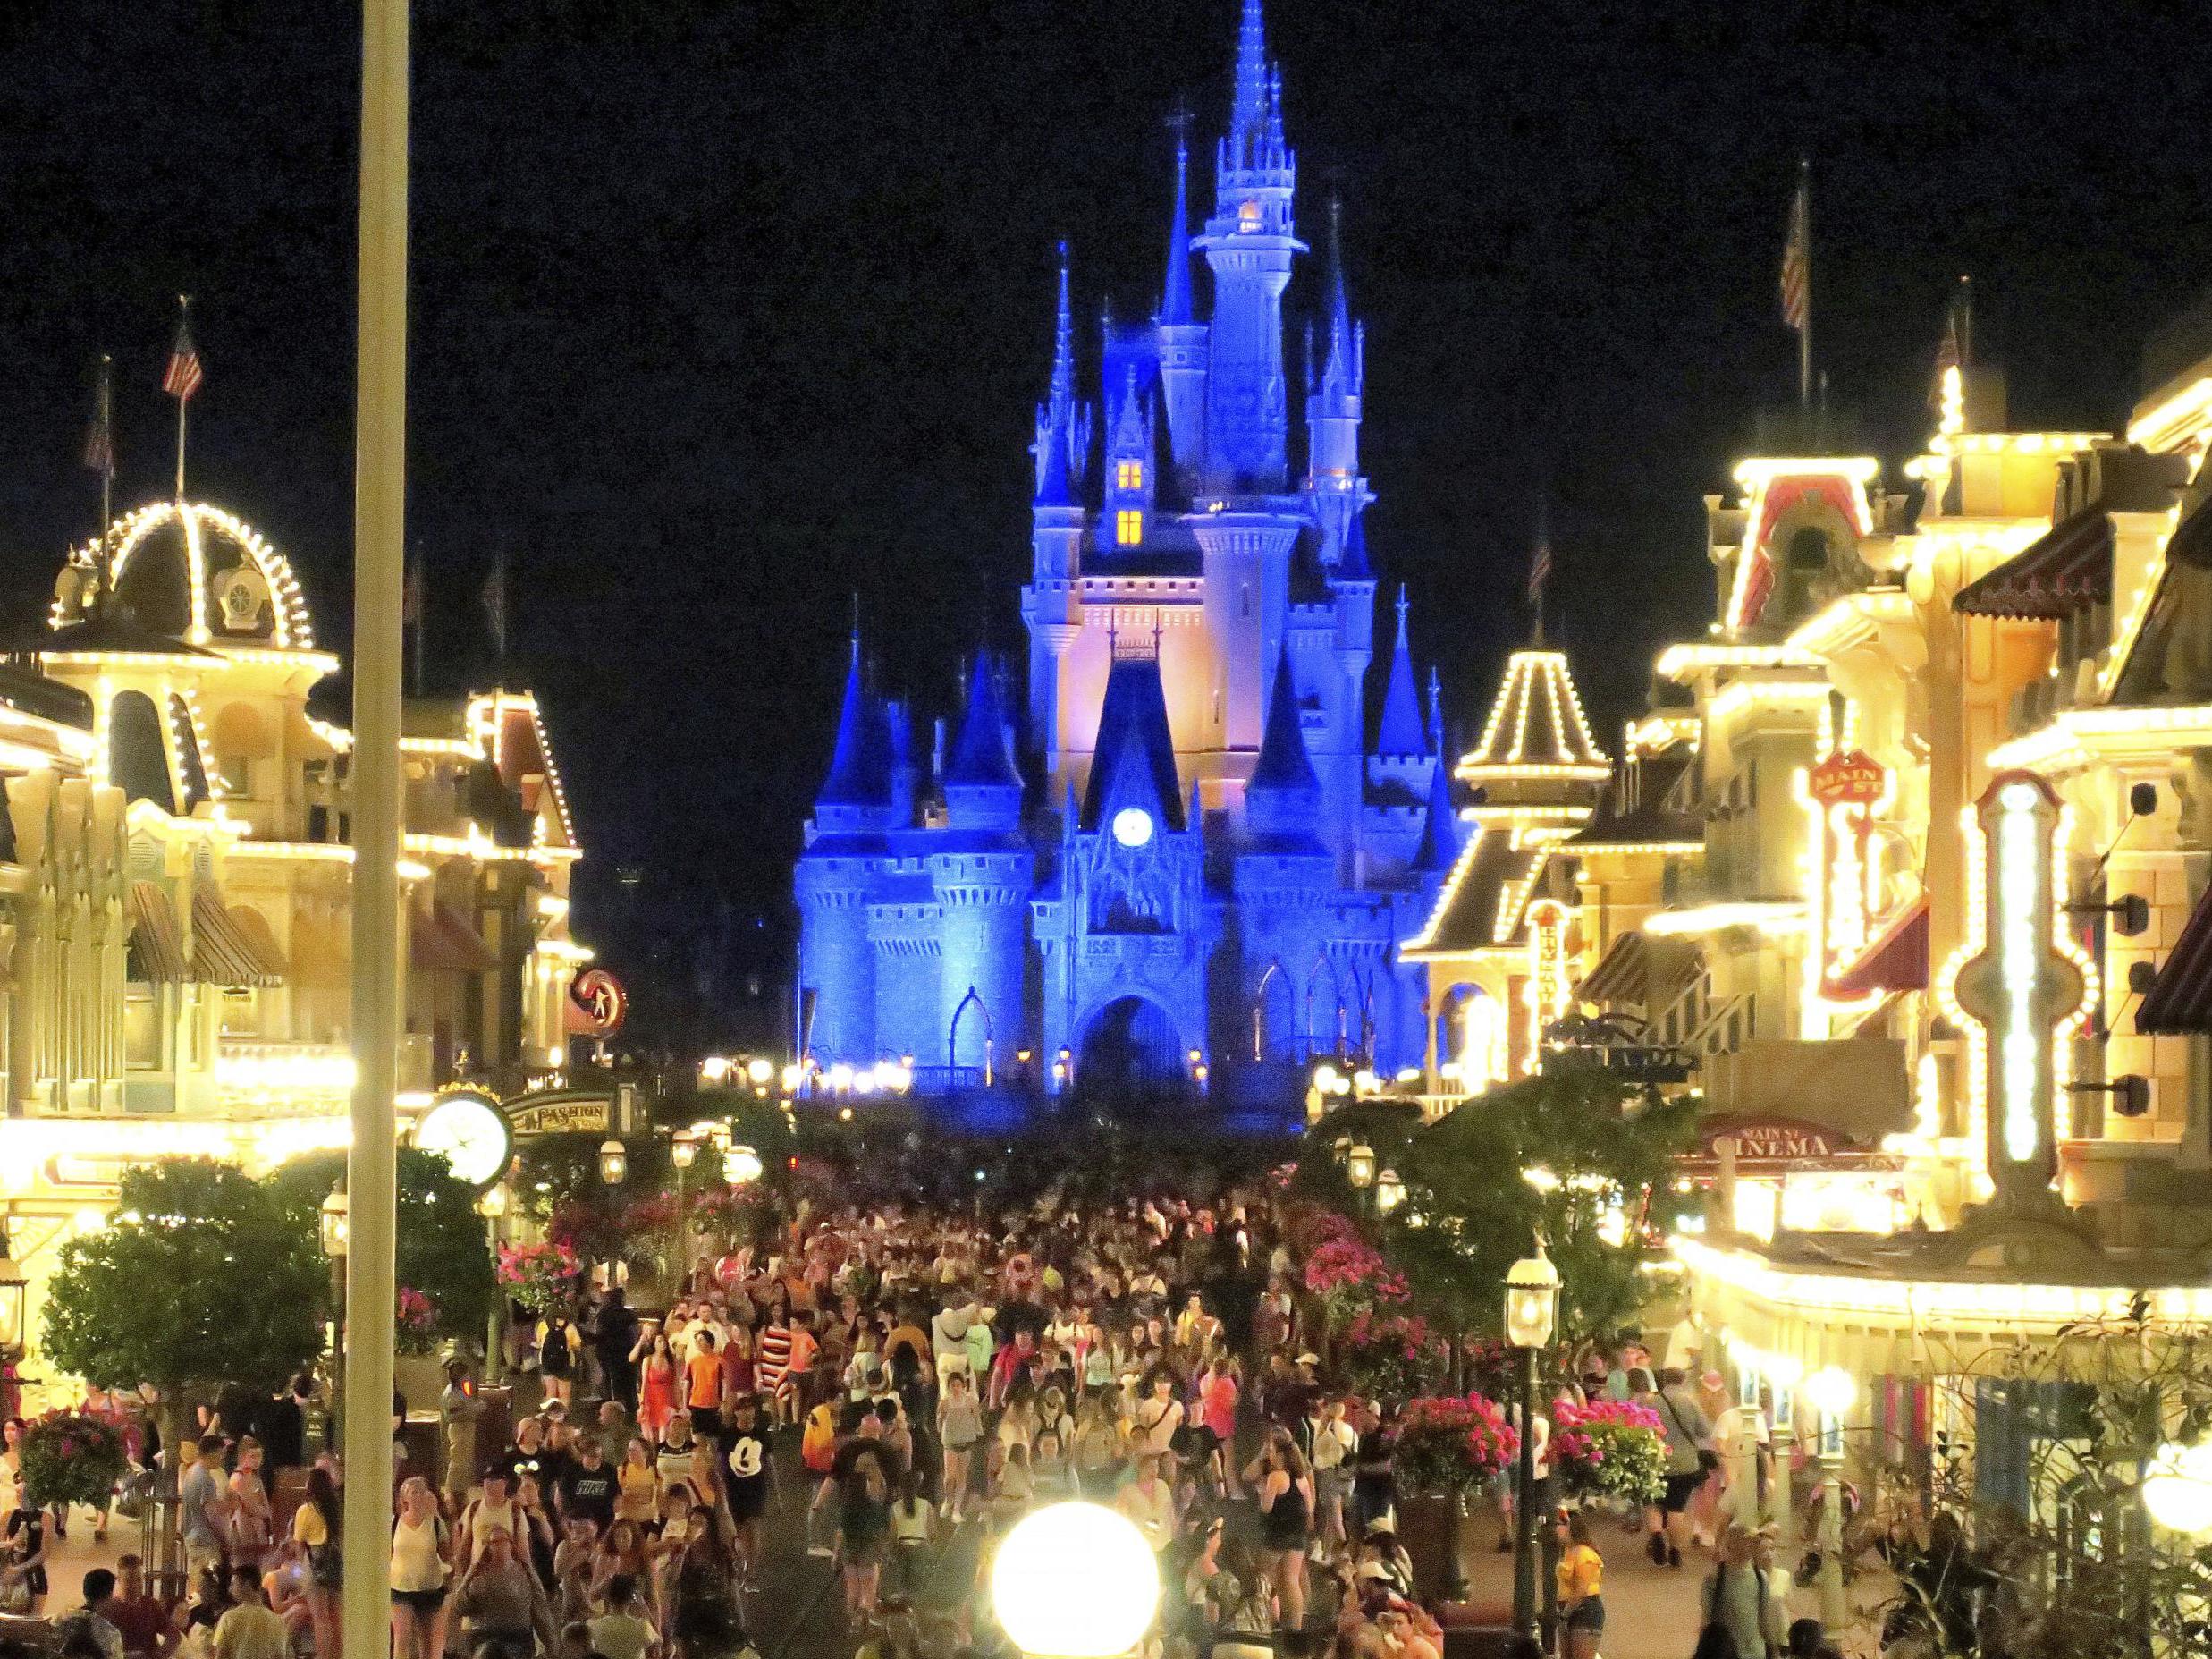 Guests at Disney theme parks are once again required to wear facemasks inside, the company announced this week.